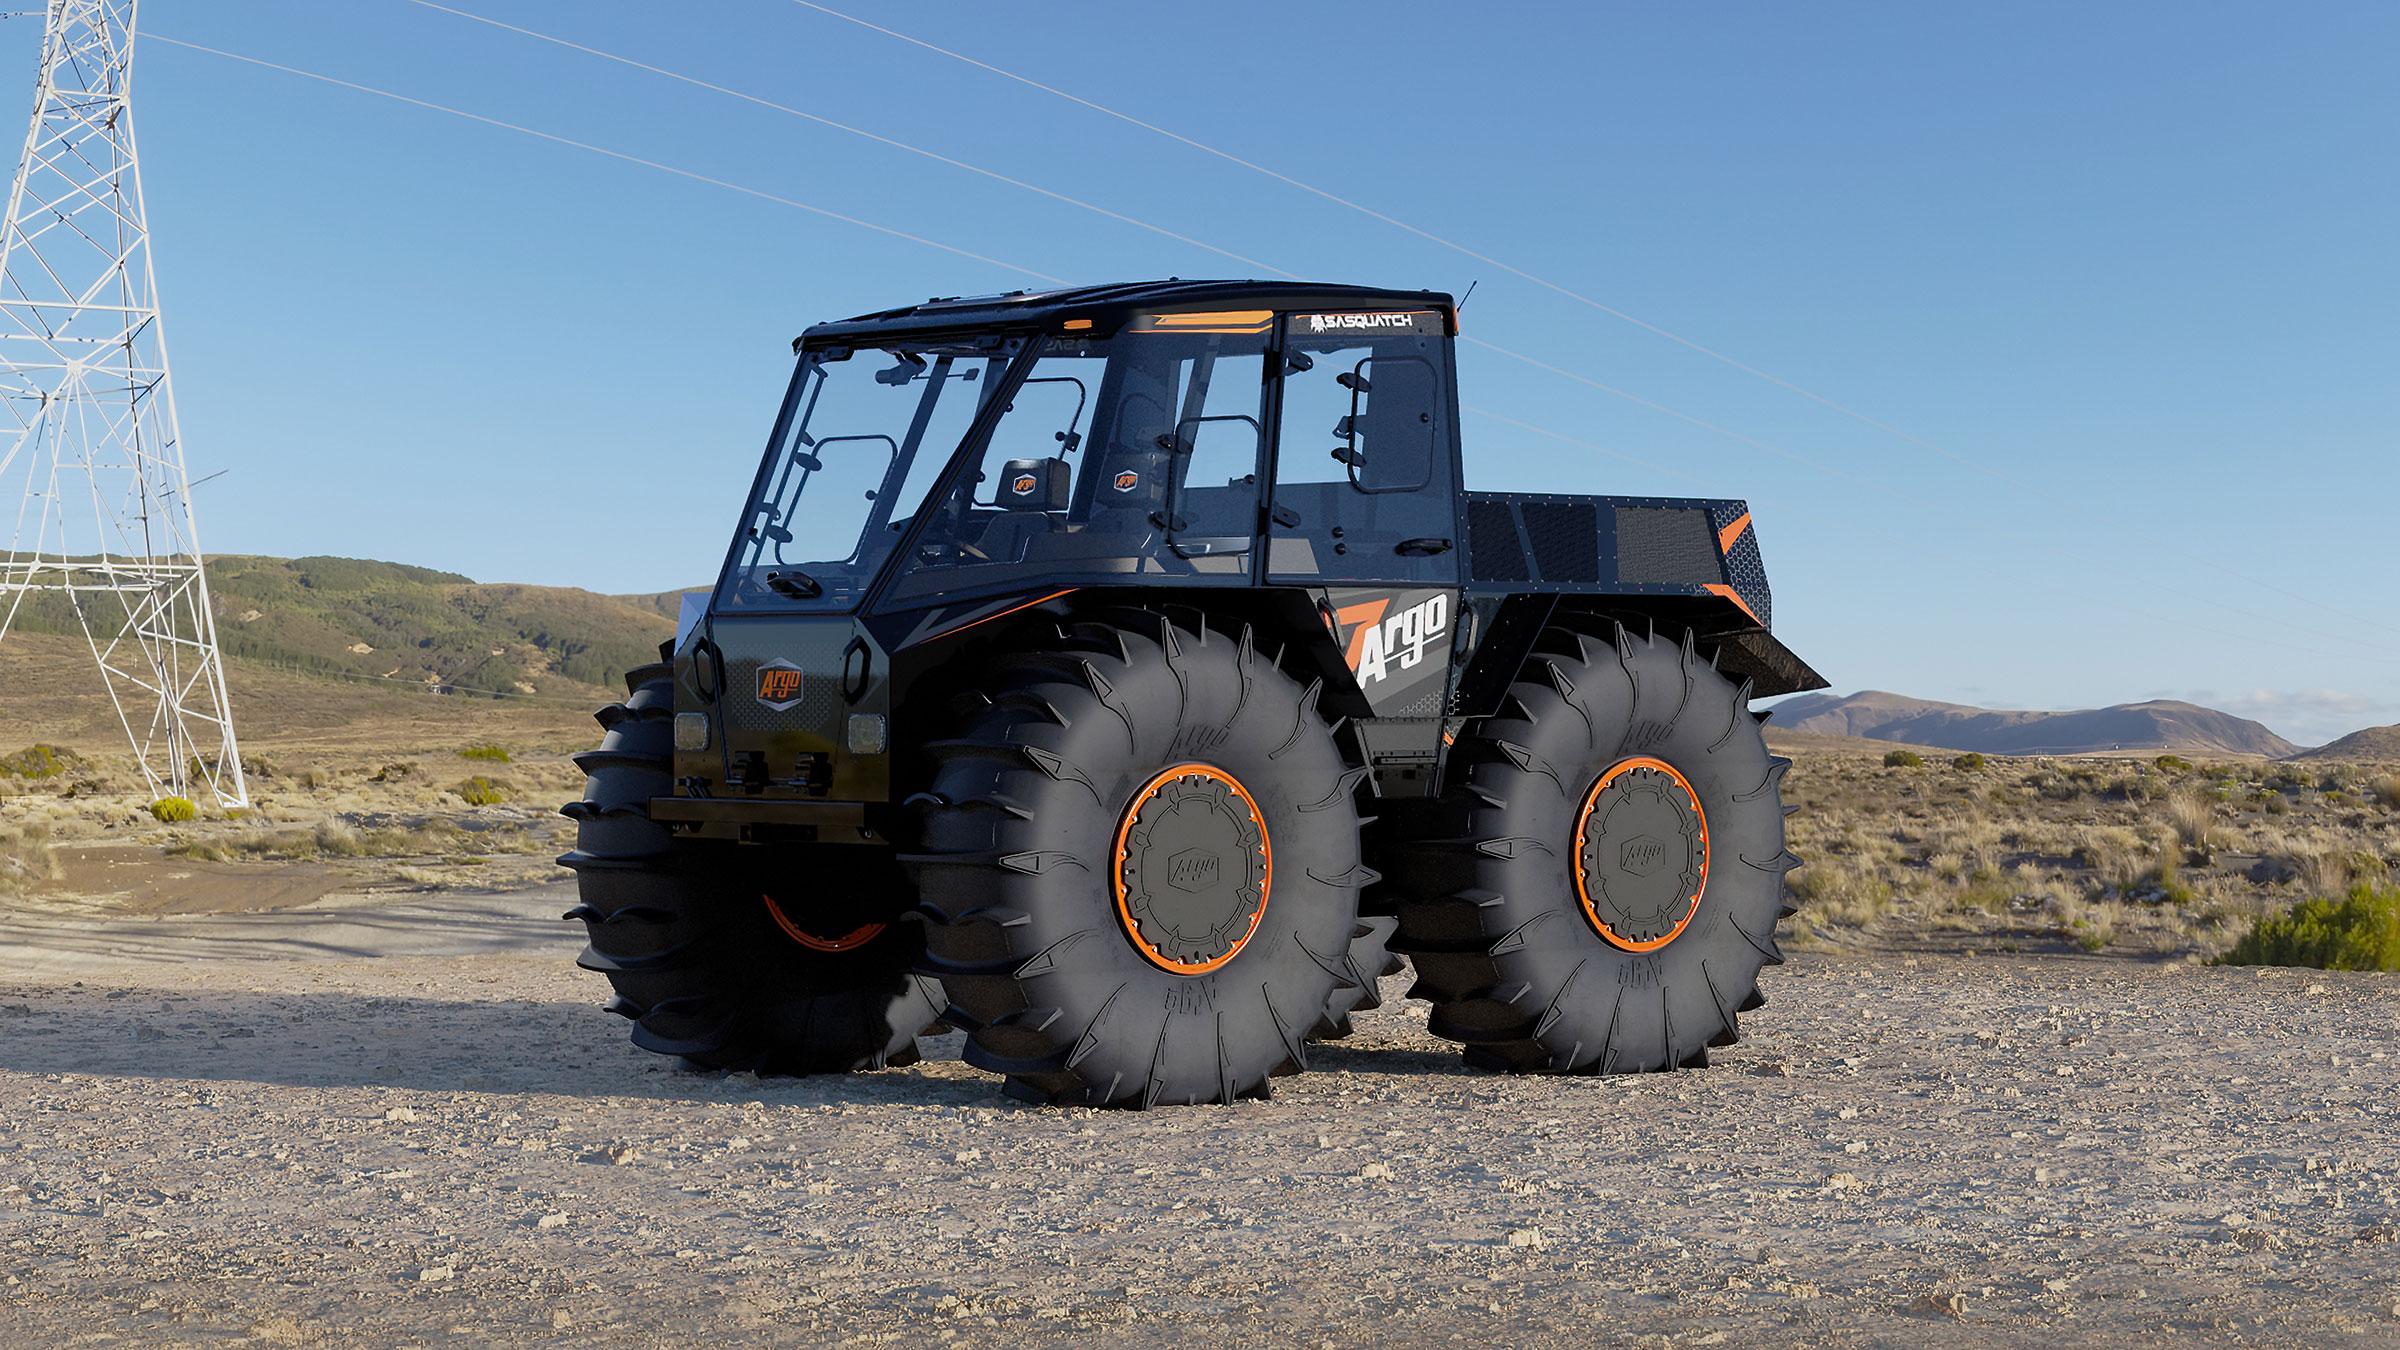 The ARGO Sasquatch carries tools and supplies with 71-in roll-over-anything tires